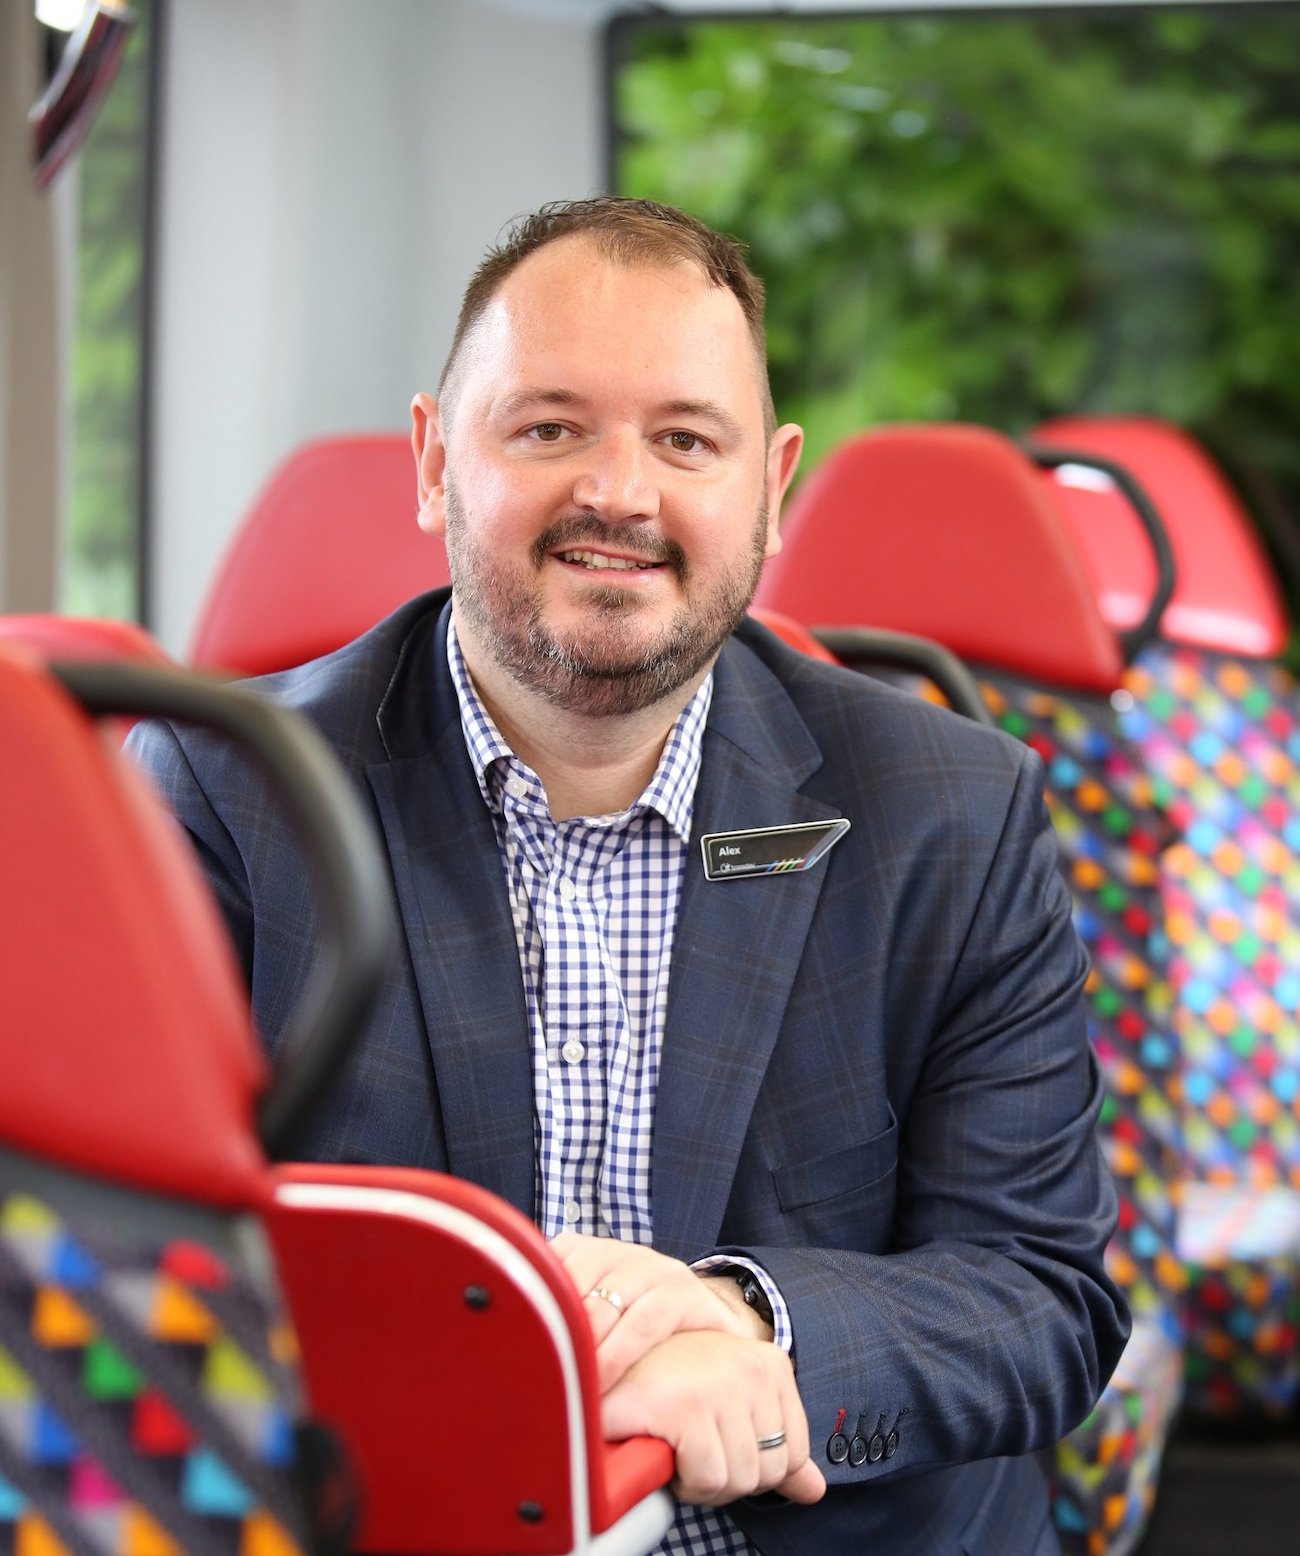 McGill’s Buses appoints new managing director amid expansion